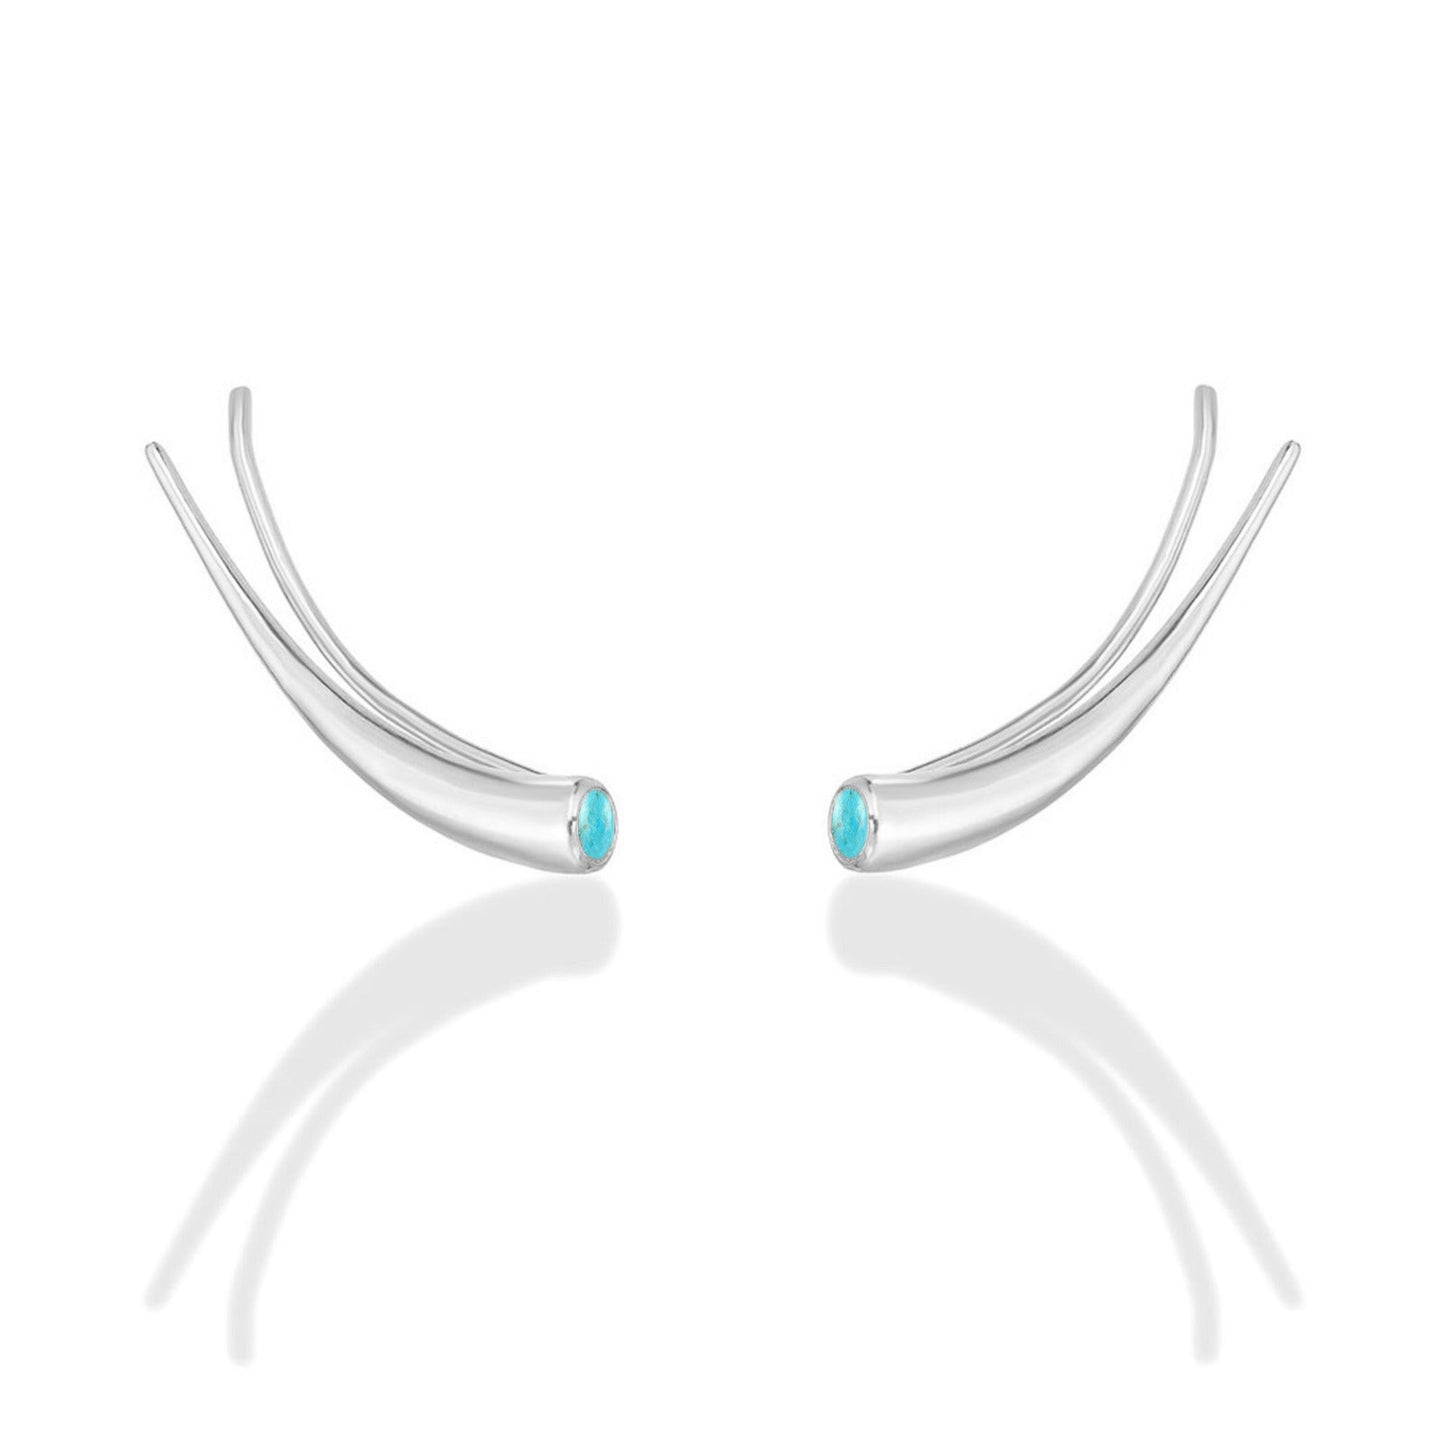 14k white gold Curved Quill Climber Earrings with turquoise